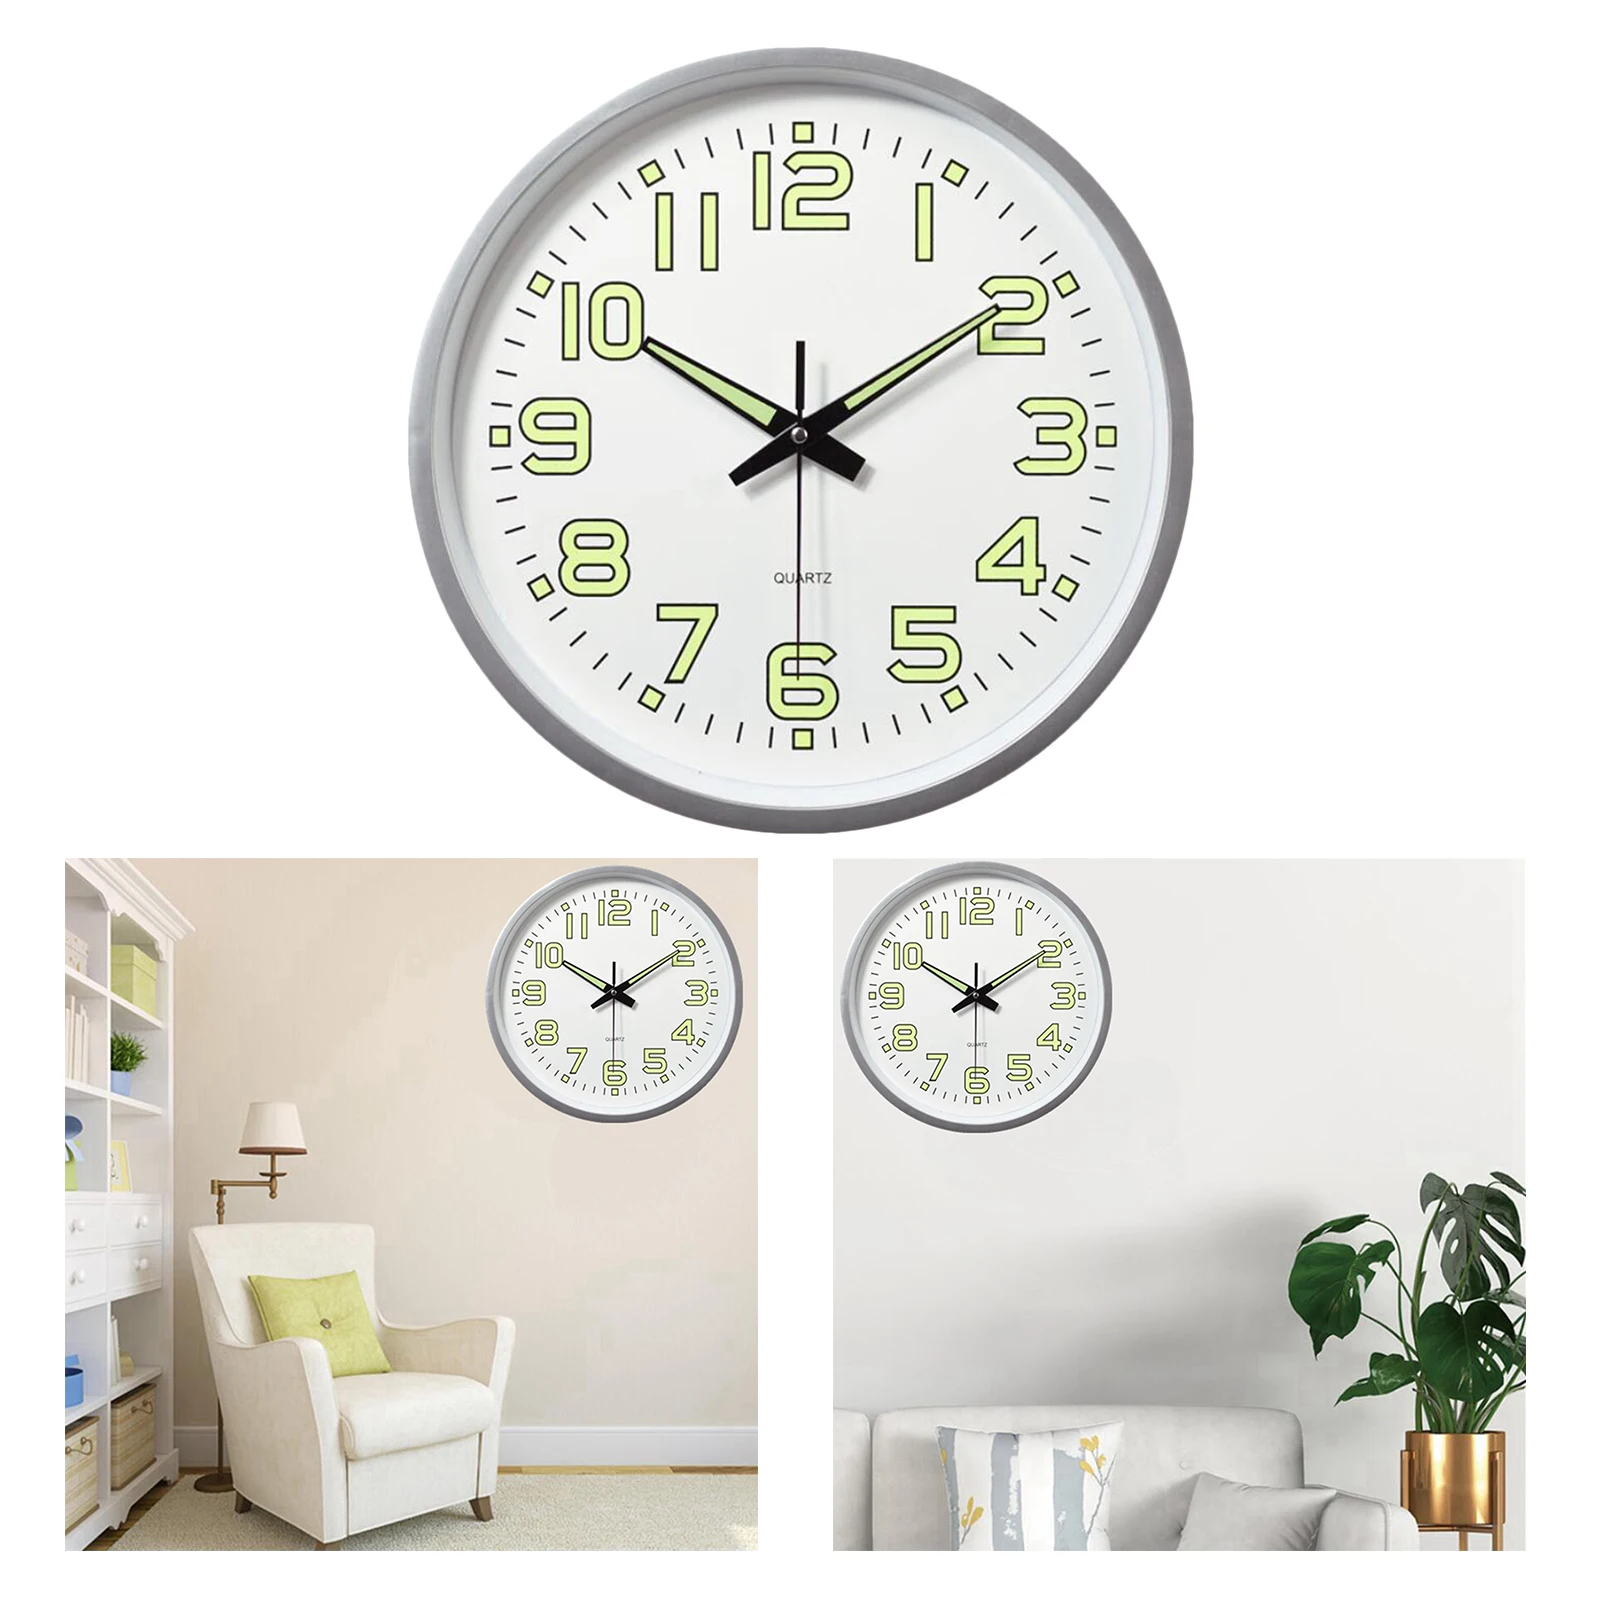 Wall Clocks Night Light Function Quartz Battery Operated Round Easy to Read